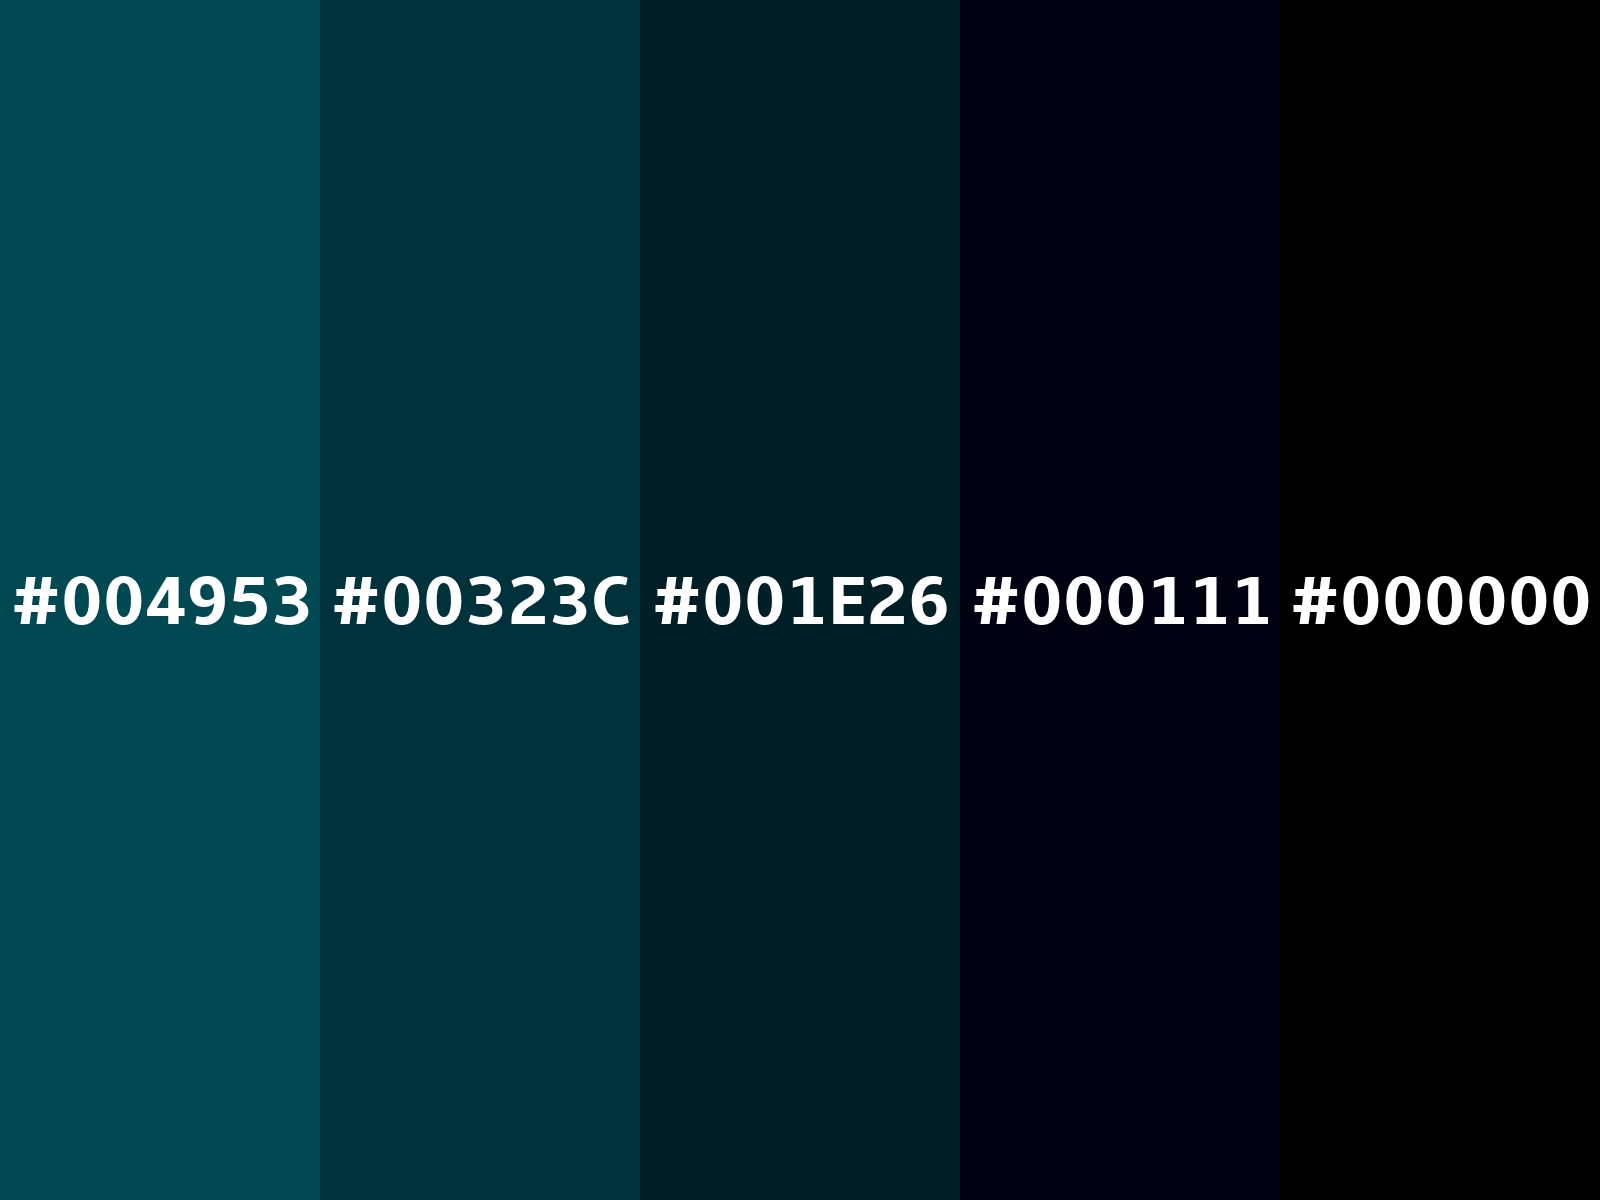 Midnight green (eagle green) color (Hex 004953)